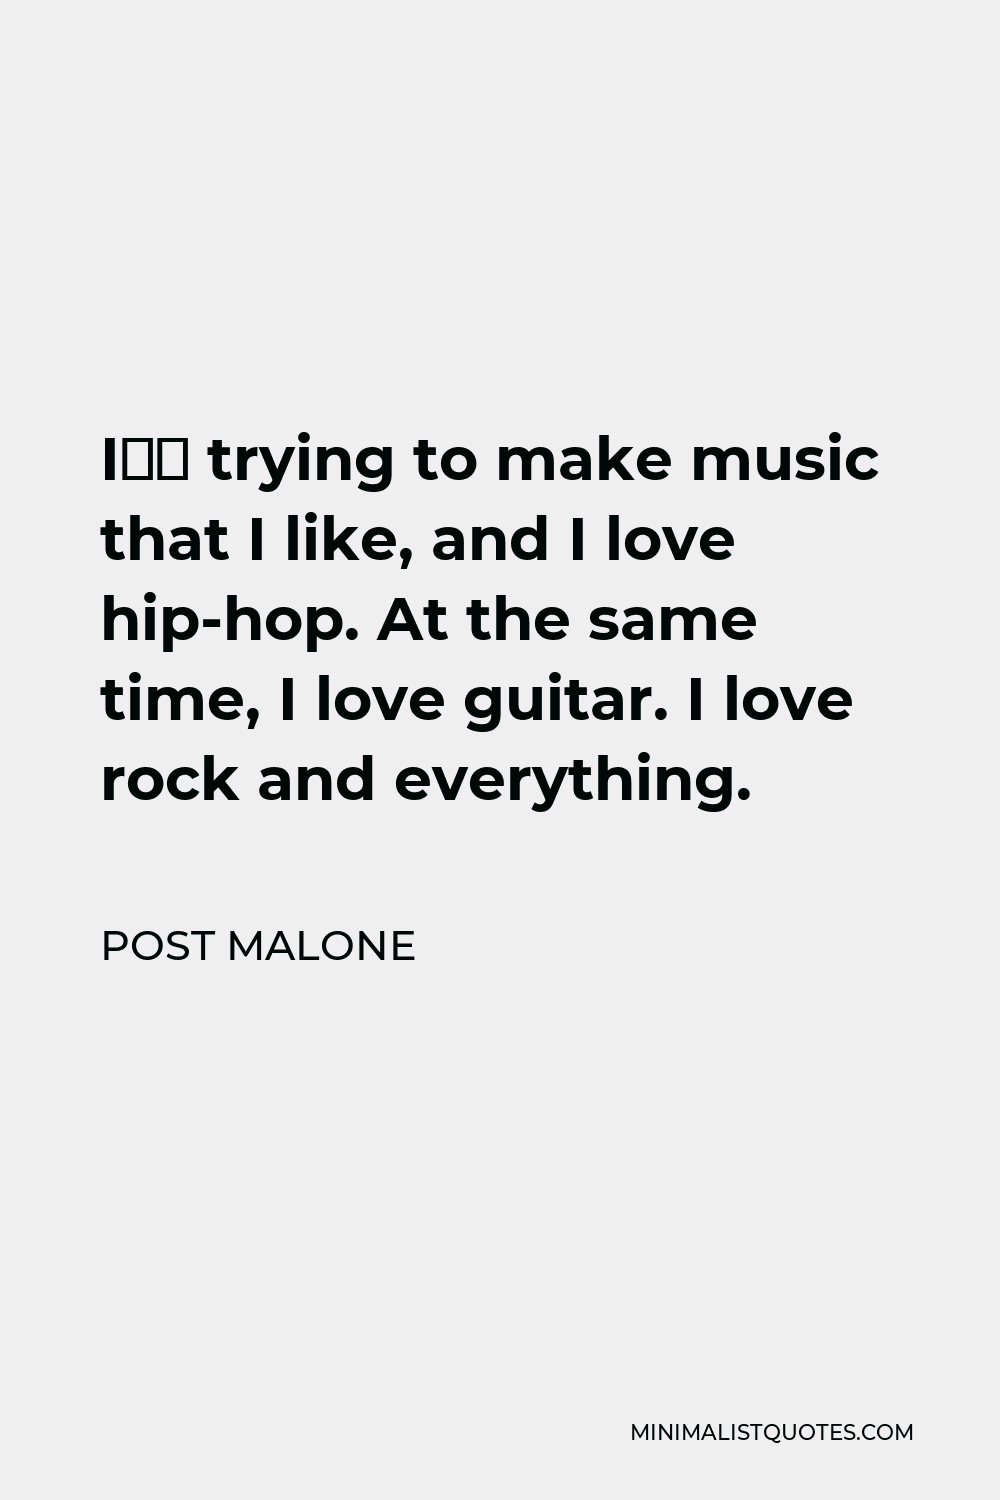 Post Malone Quote - I’m trying to make music that I like, and I love hip-hop. At the same time, I love guitar. I love rock and everything.